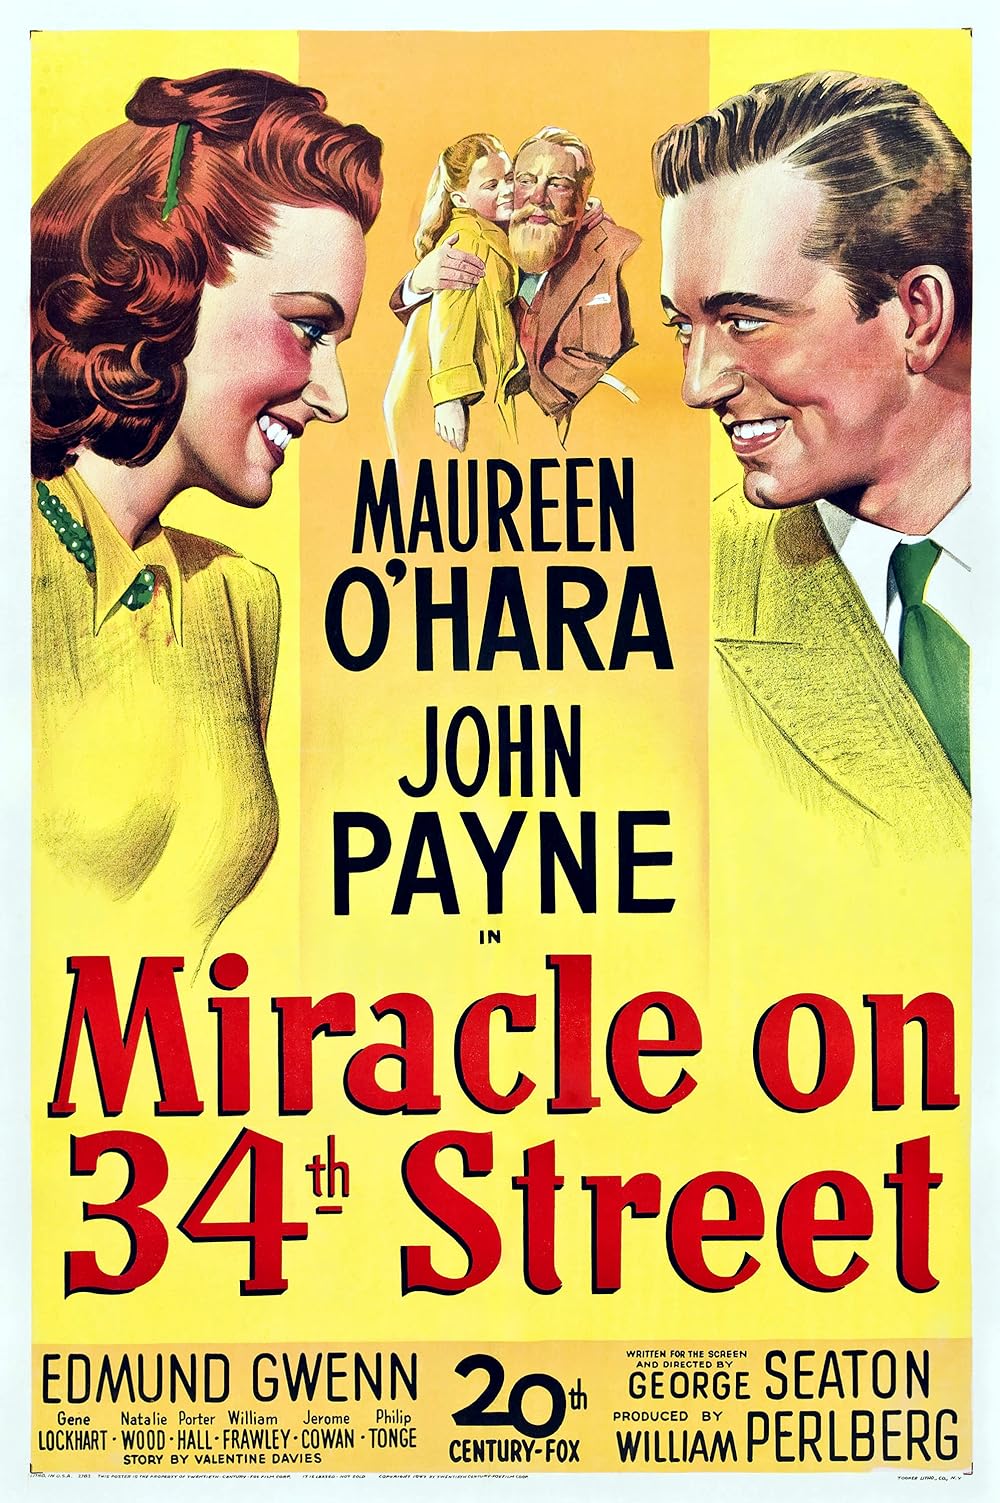 Best classic christmas movies - Miracle on 34th Street